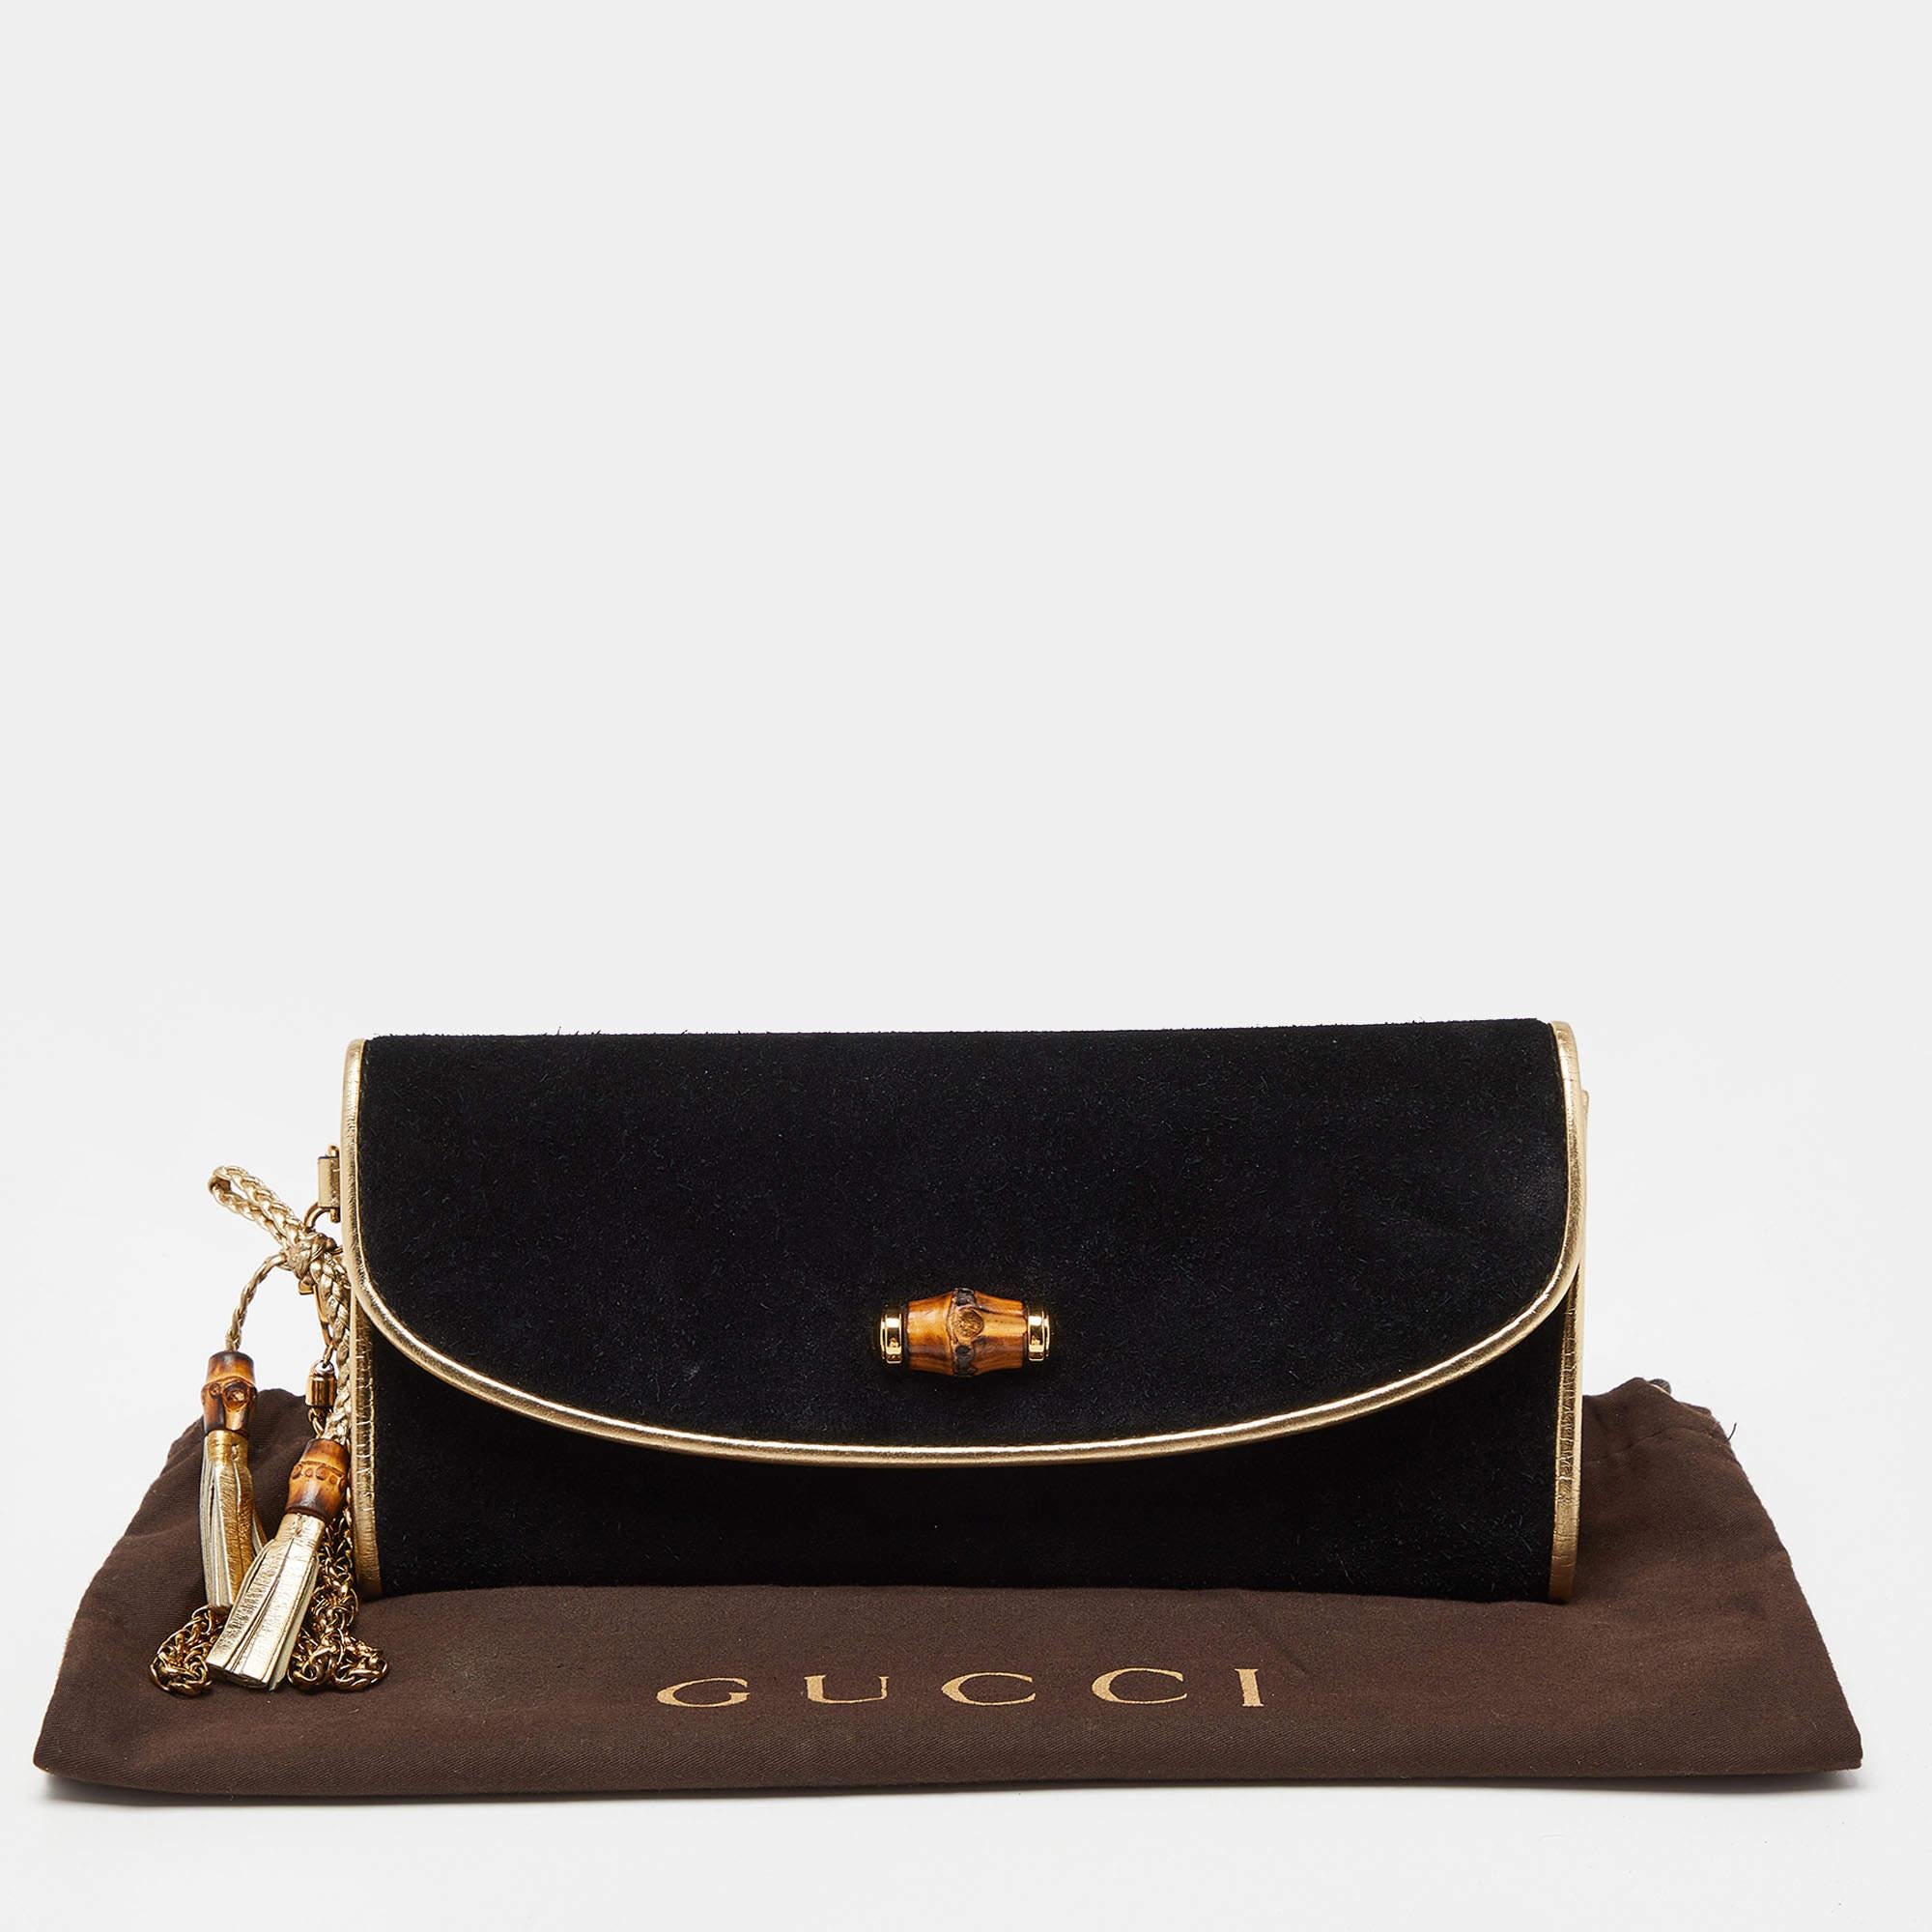 Gucci Black/Gold Suede Bamboo Wristlet Clutch For Sale 11